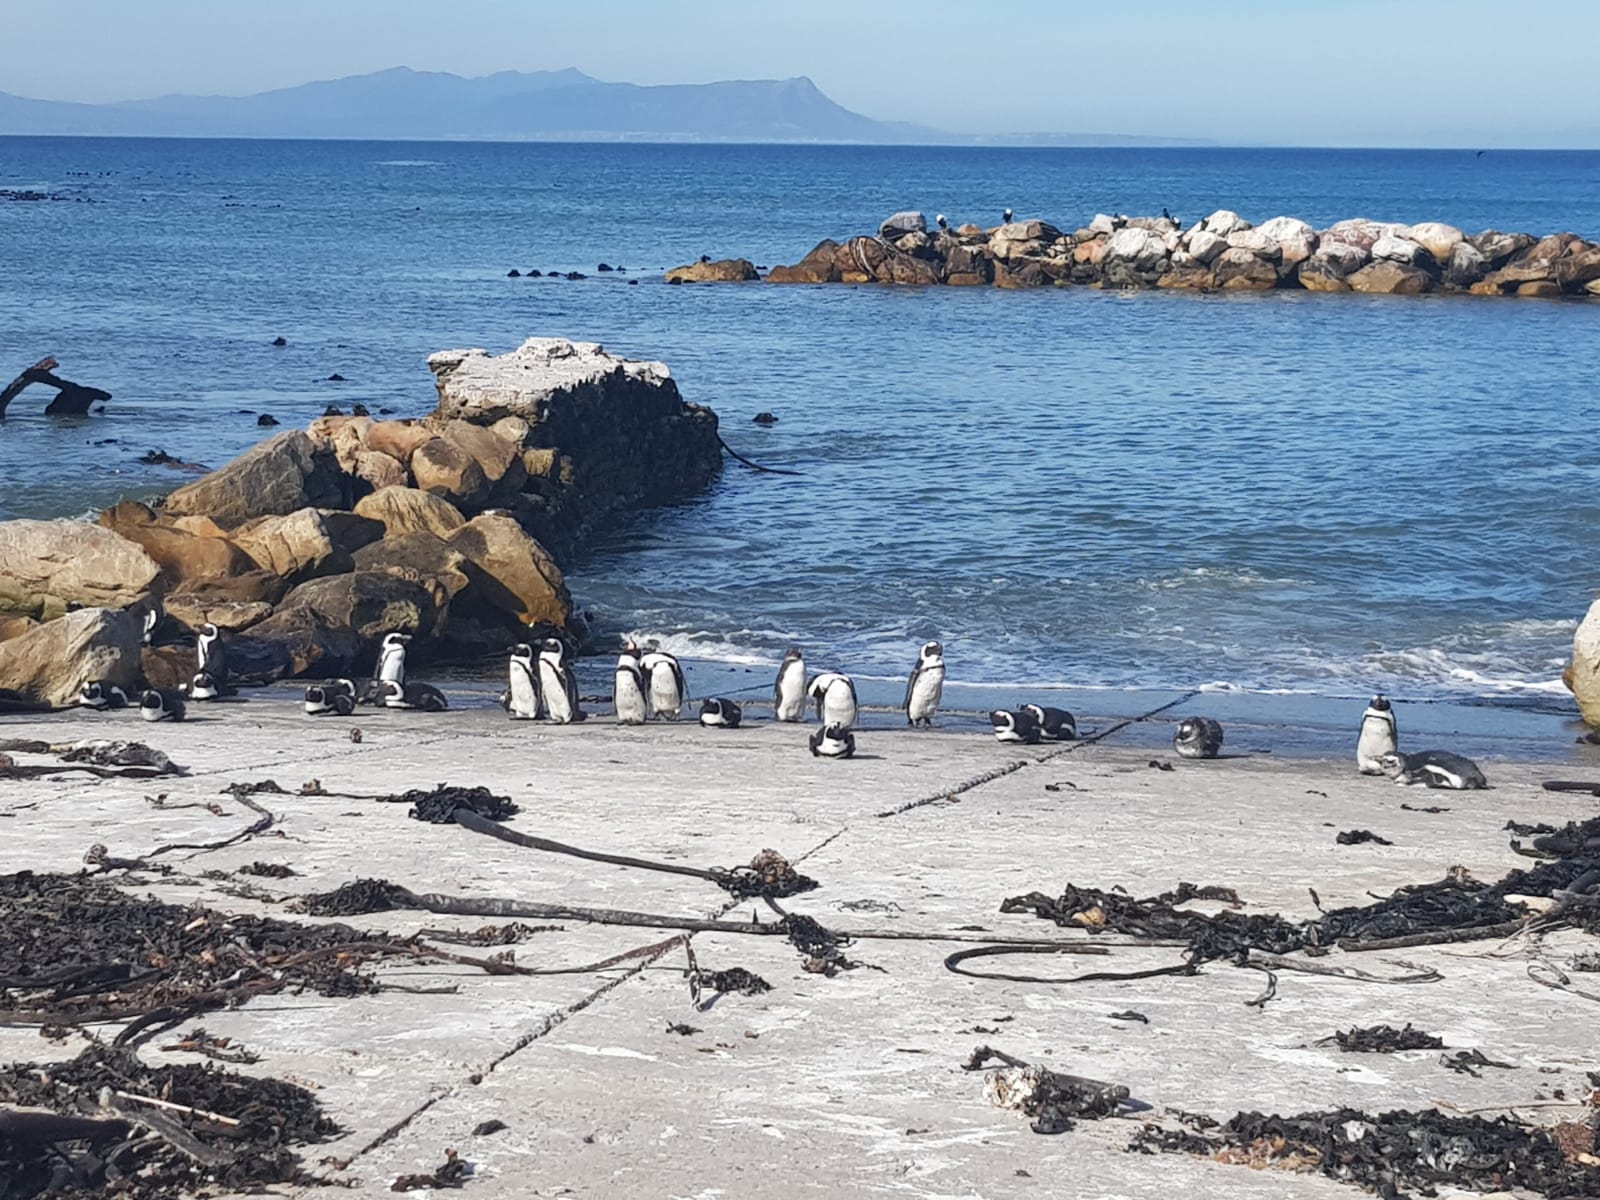 Penguin colony in South Africa.